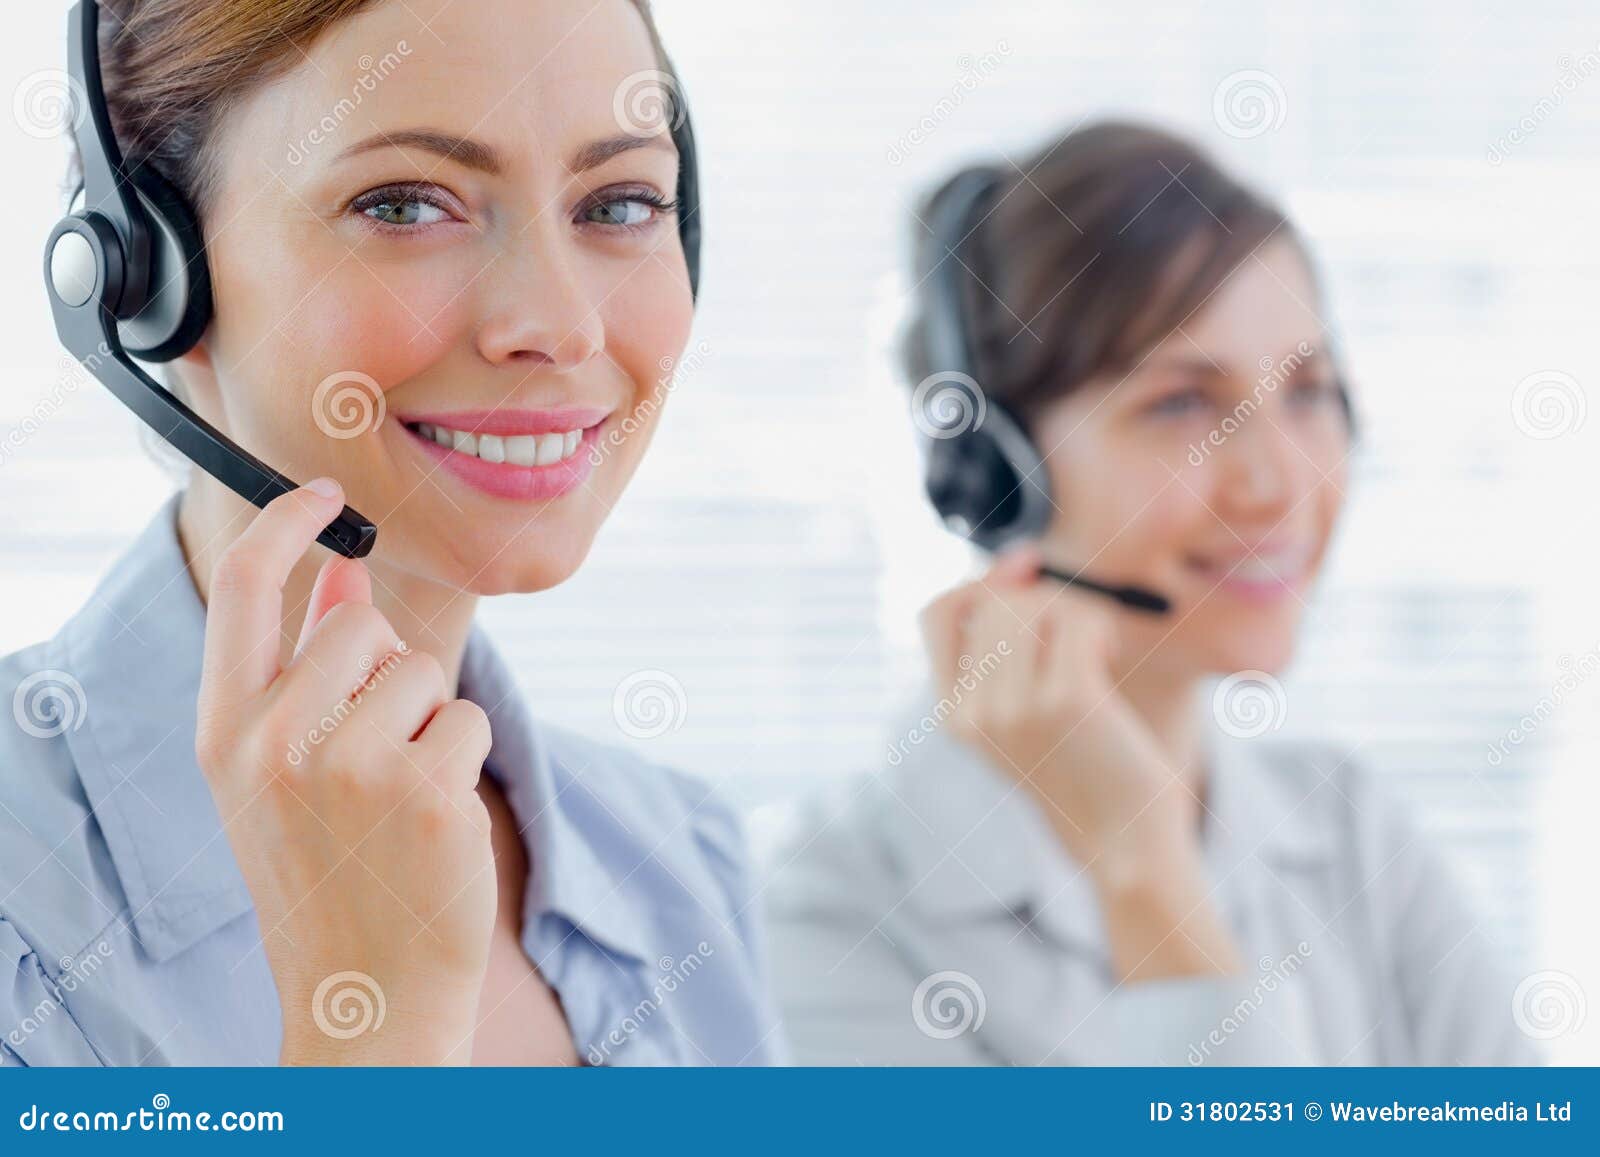 smiling call centre agents with headsets at work